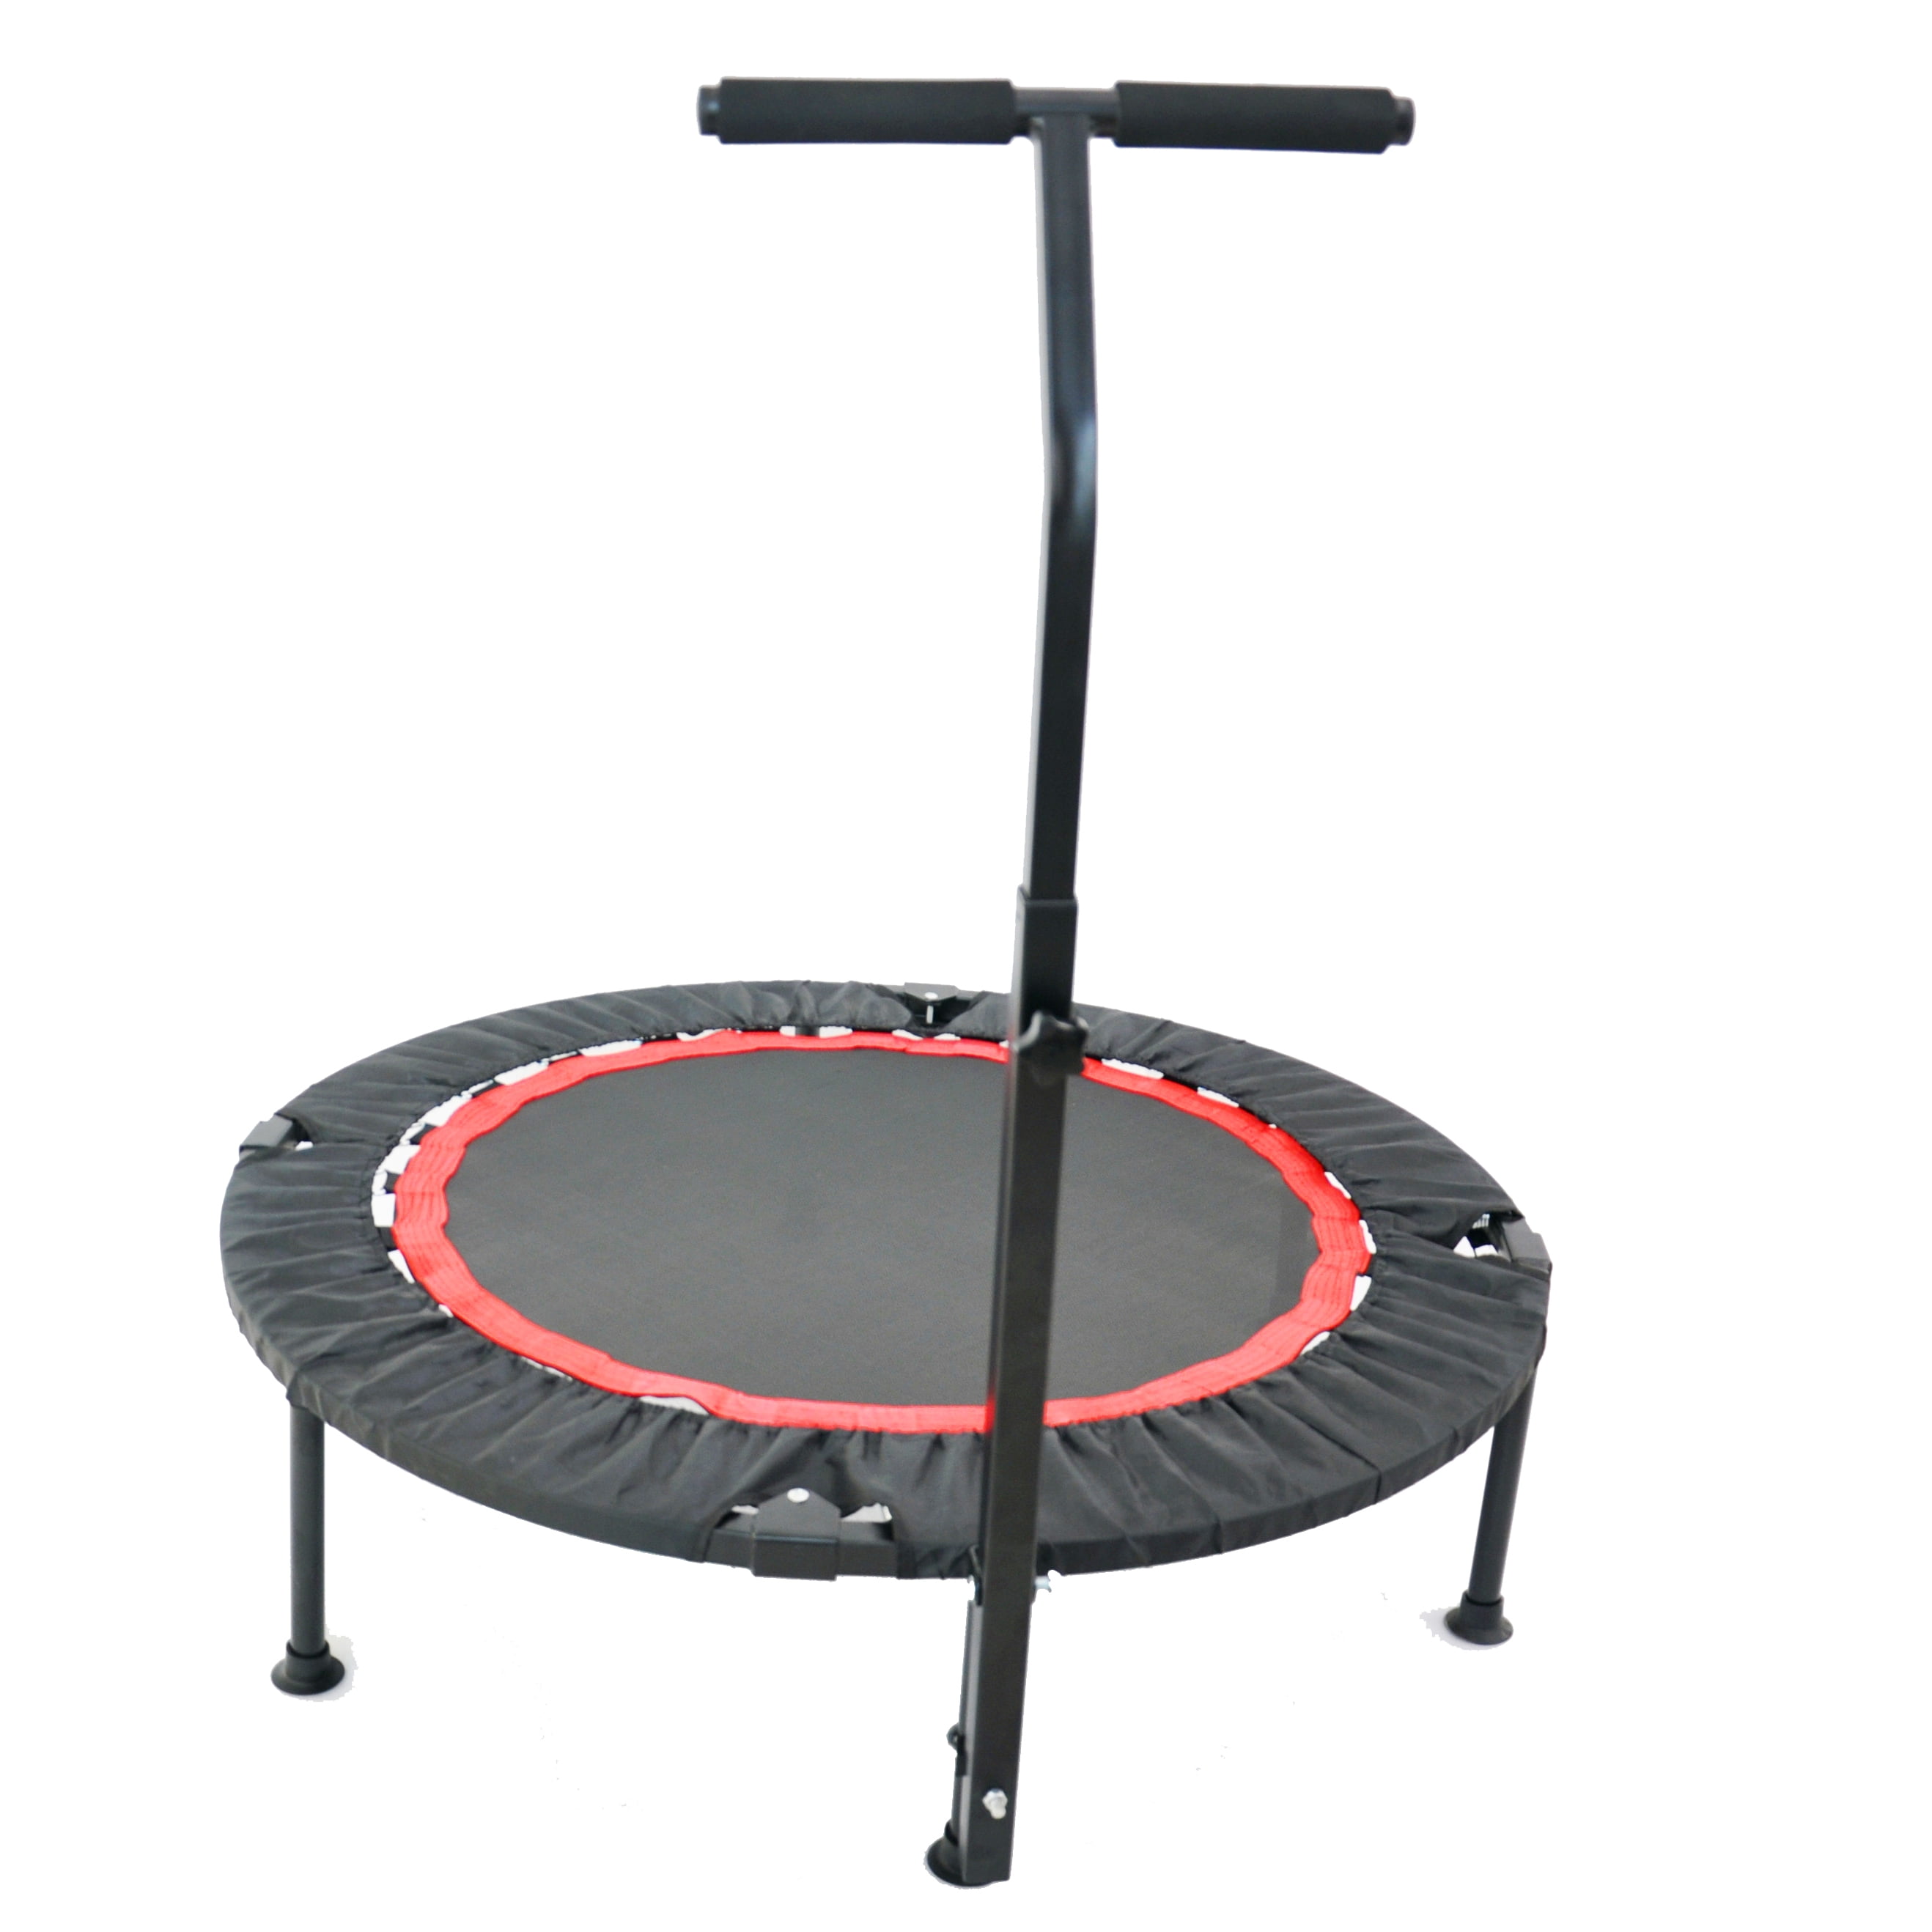 Exercise Trampoline For Adults or Kids, Fitness Rebounder Trampoline